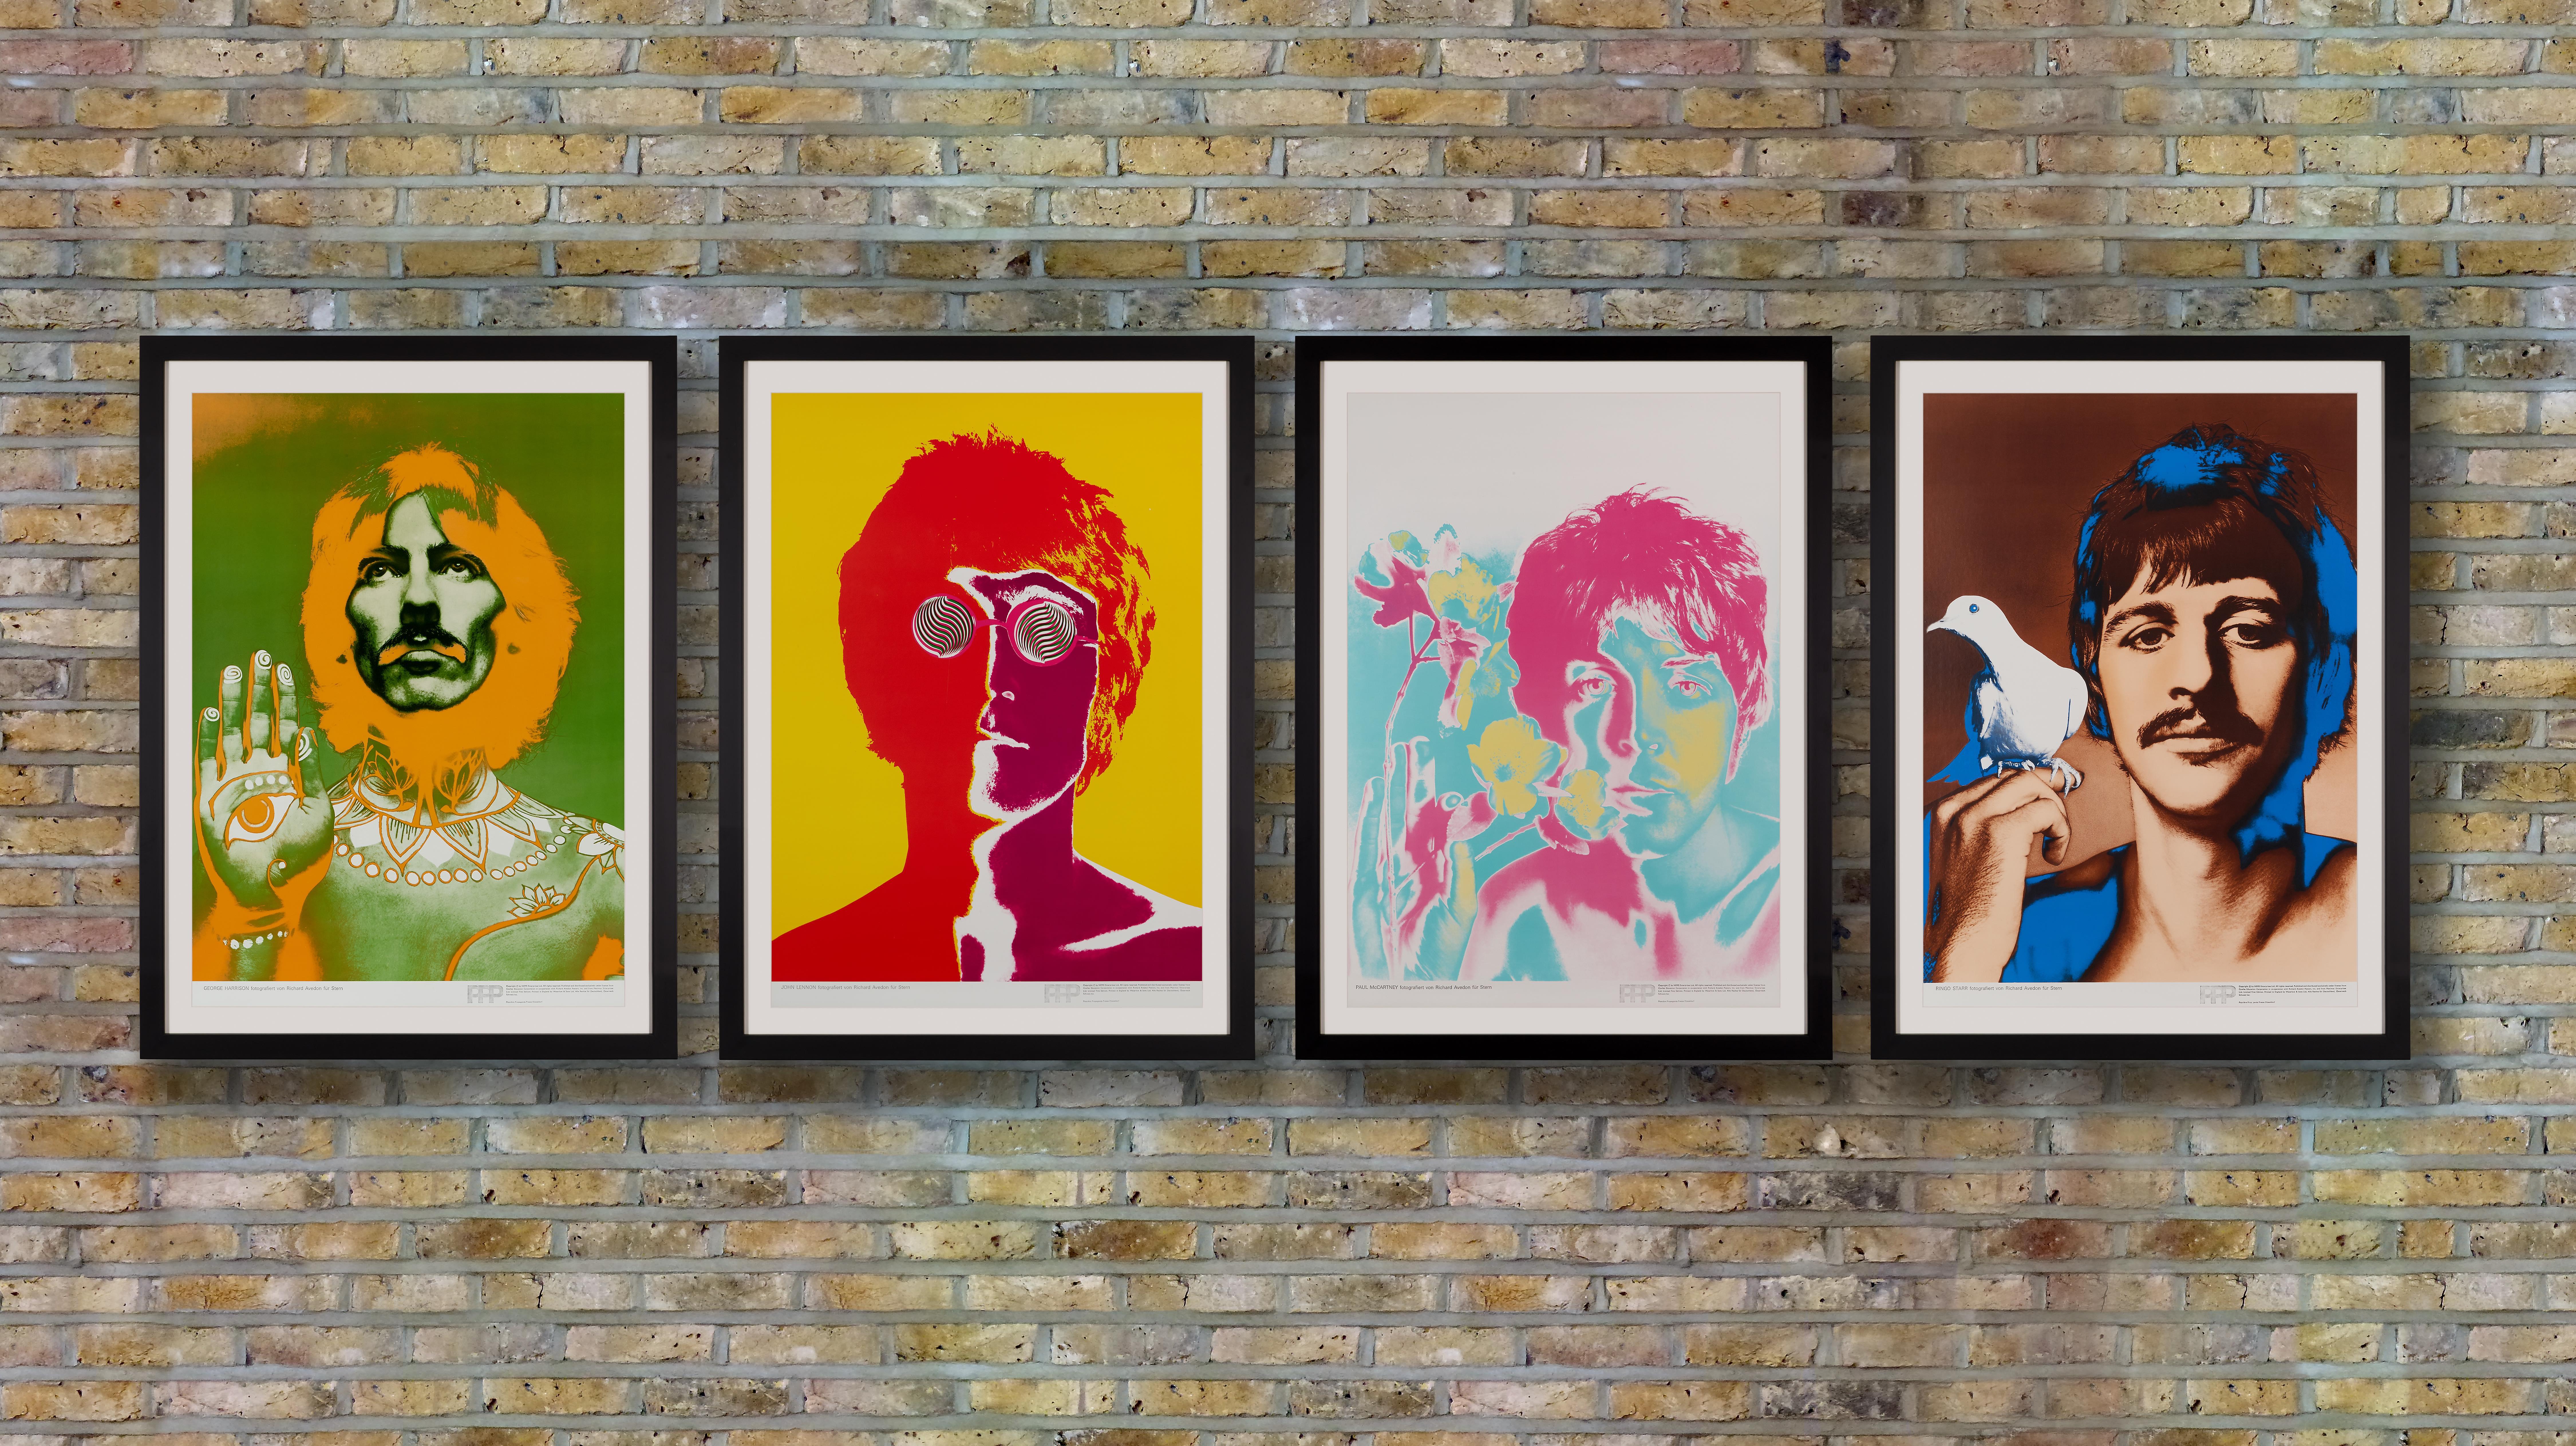 German 'The Beatles' Complete Set of Five Promotional Posters by Richard Avedon, 1967 For Sale